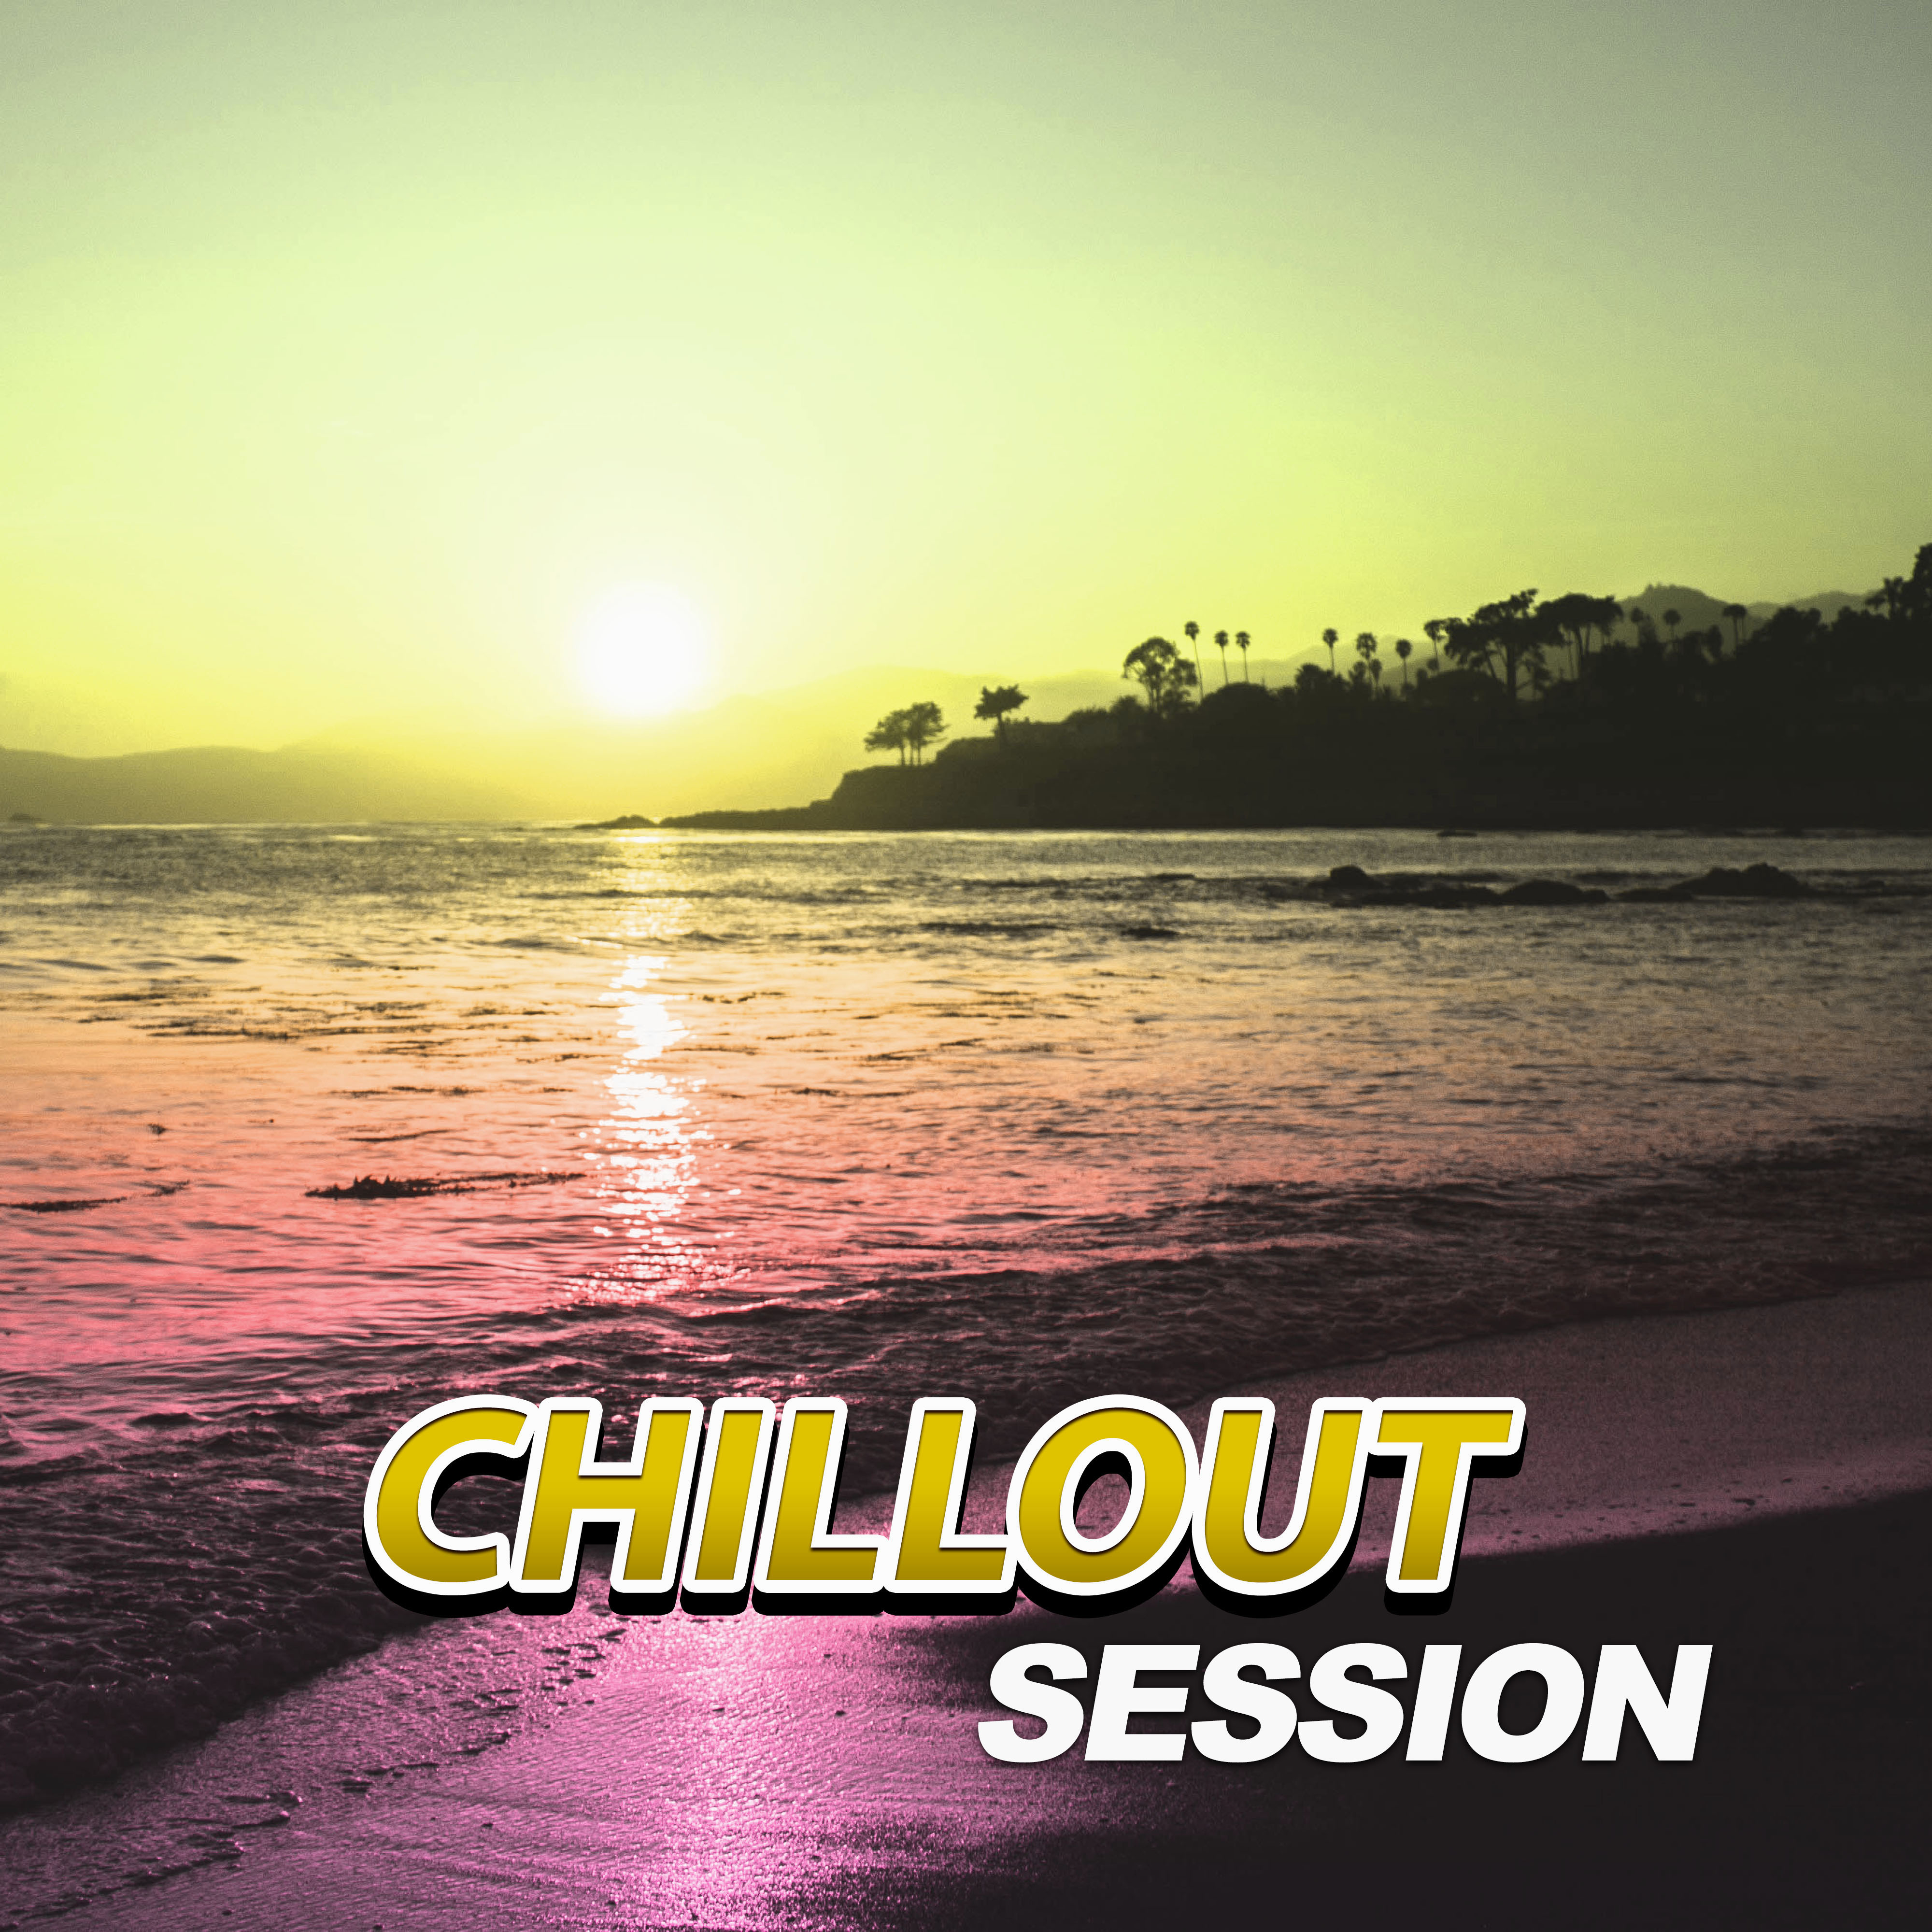 Chillout Session – Collection of Most Beautiful Chill Out Music, Chill Yourself, Relaxation Music